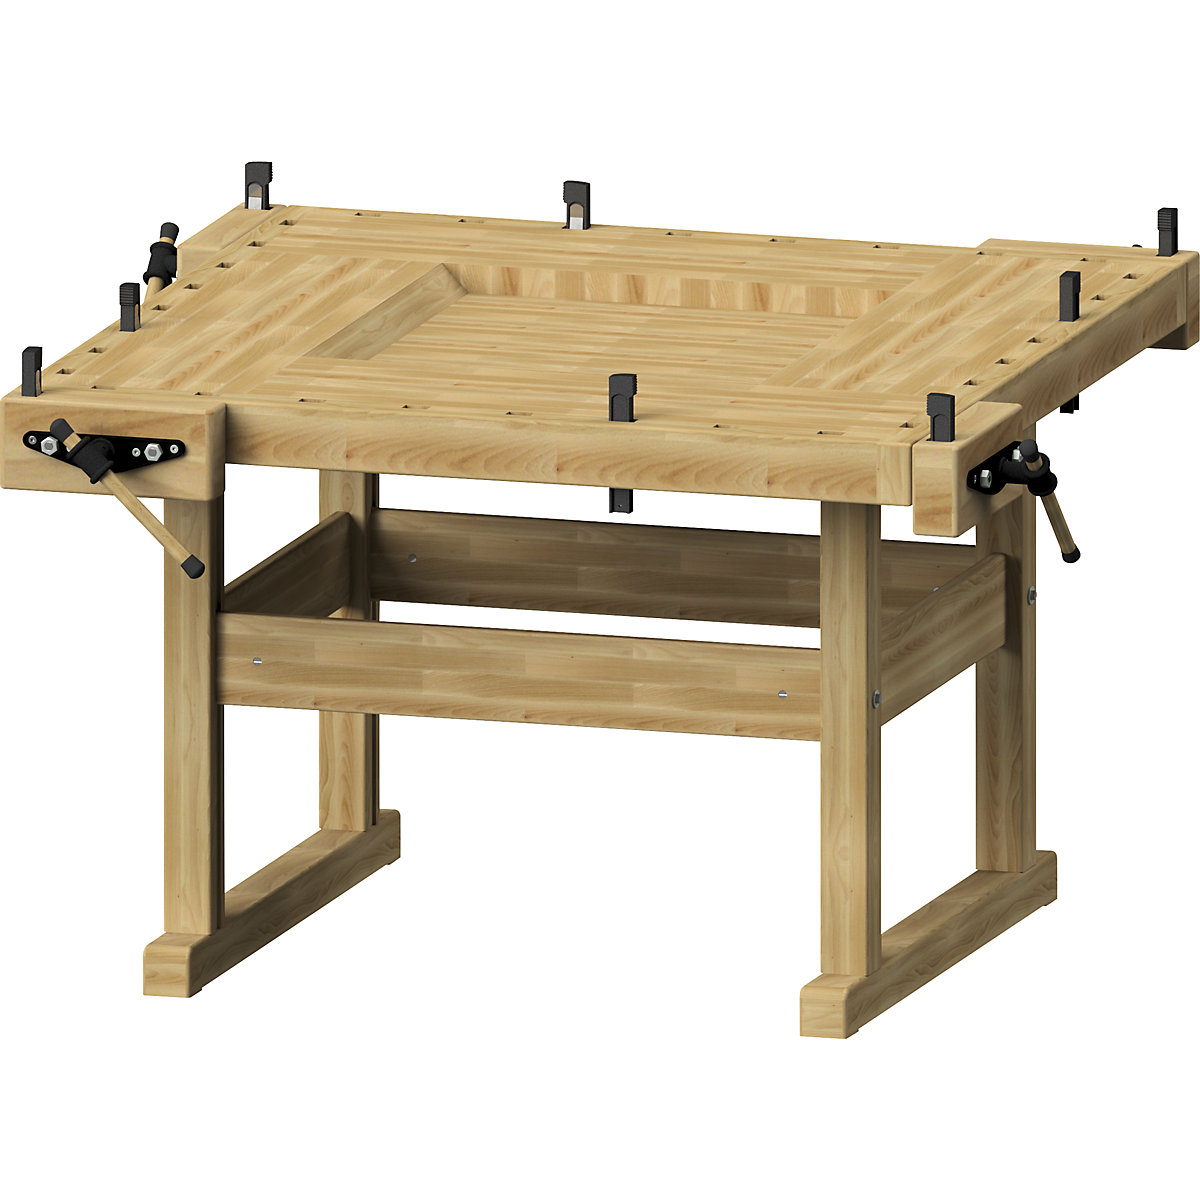 Planing bench with 4 workplaces – ANKE